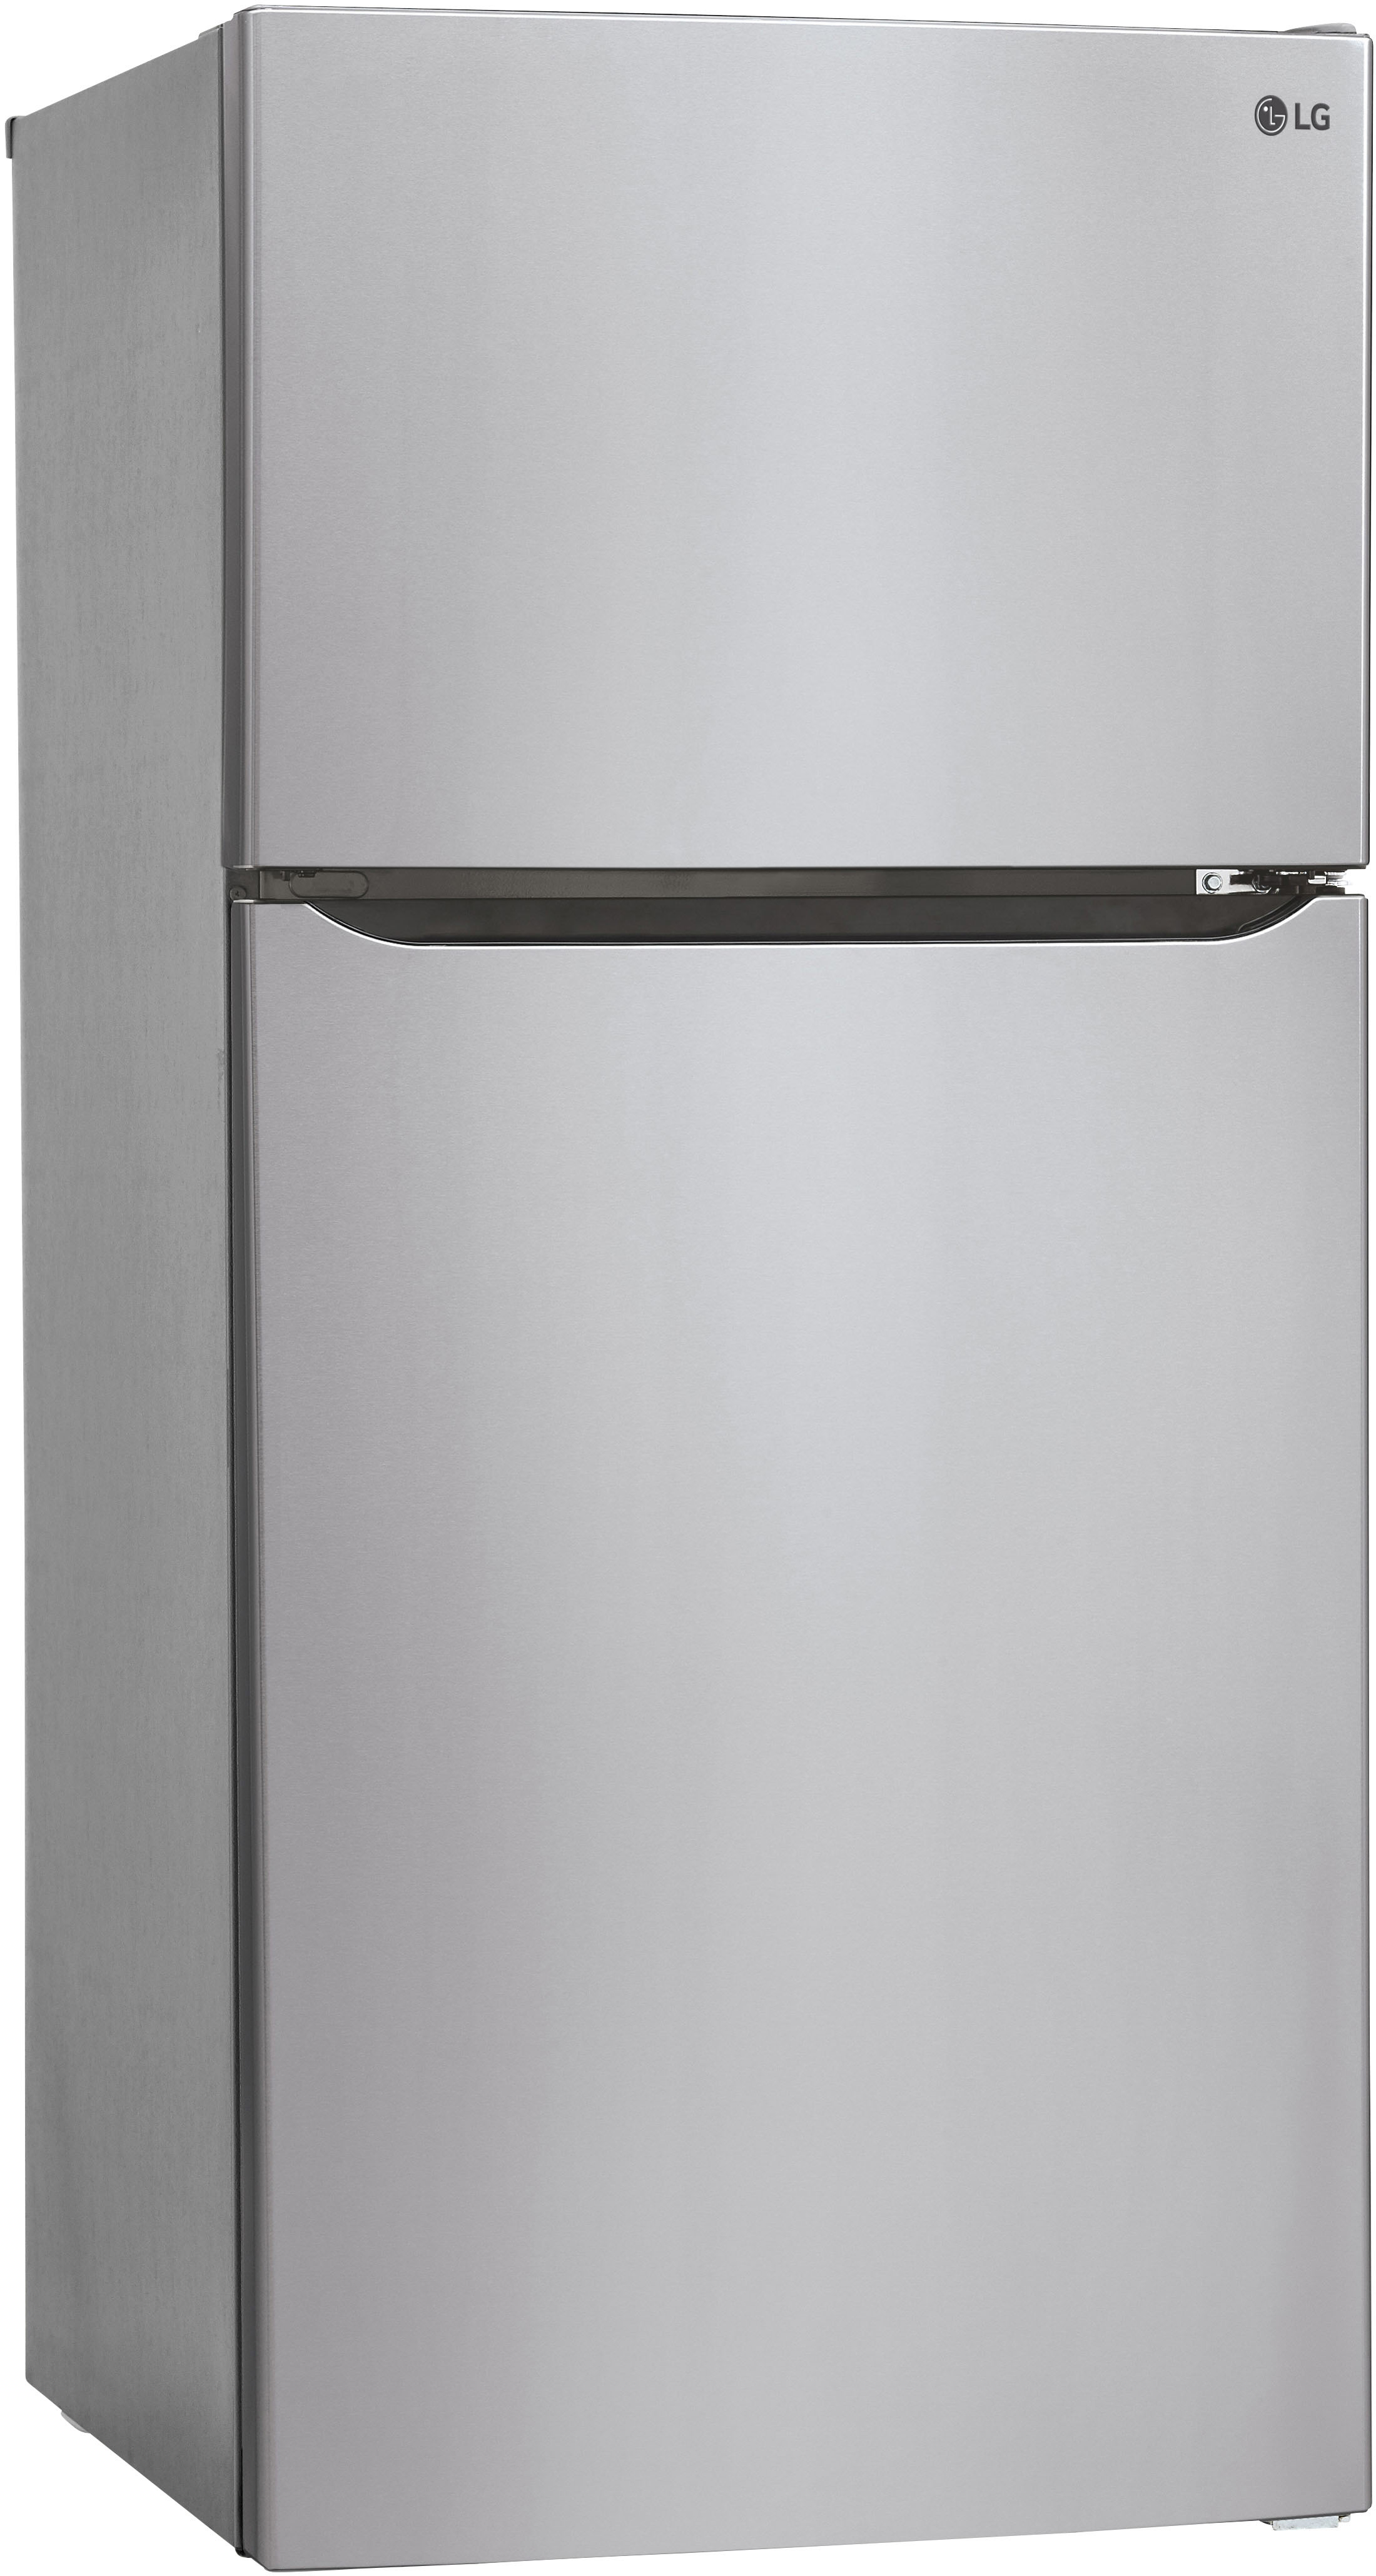 Left View: LG - 23.8 Cu Ft Top Mount Refrigerator with Internal Water Dispenser - Stainless steel